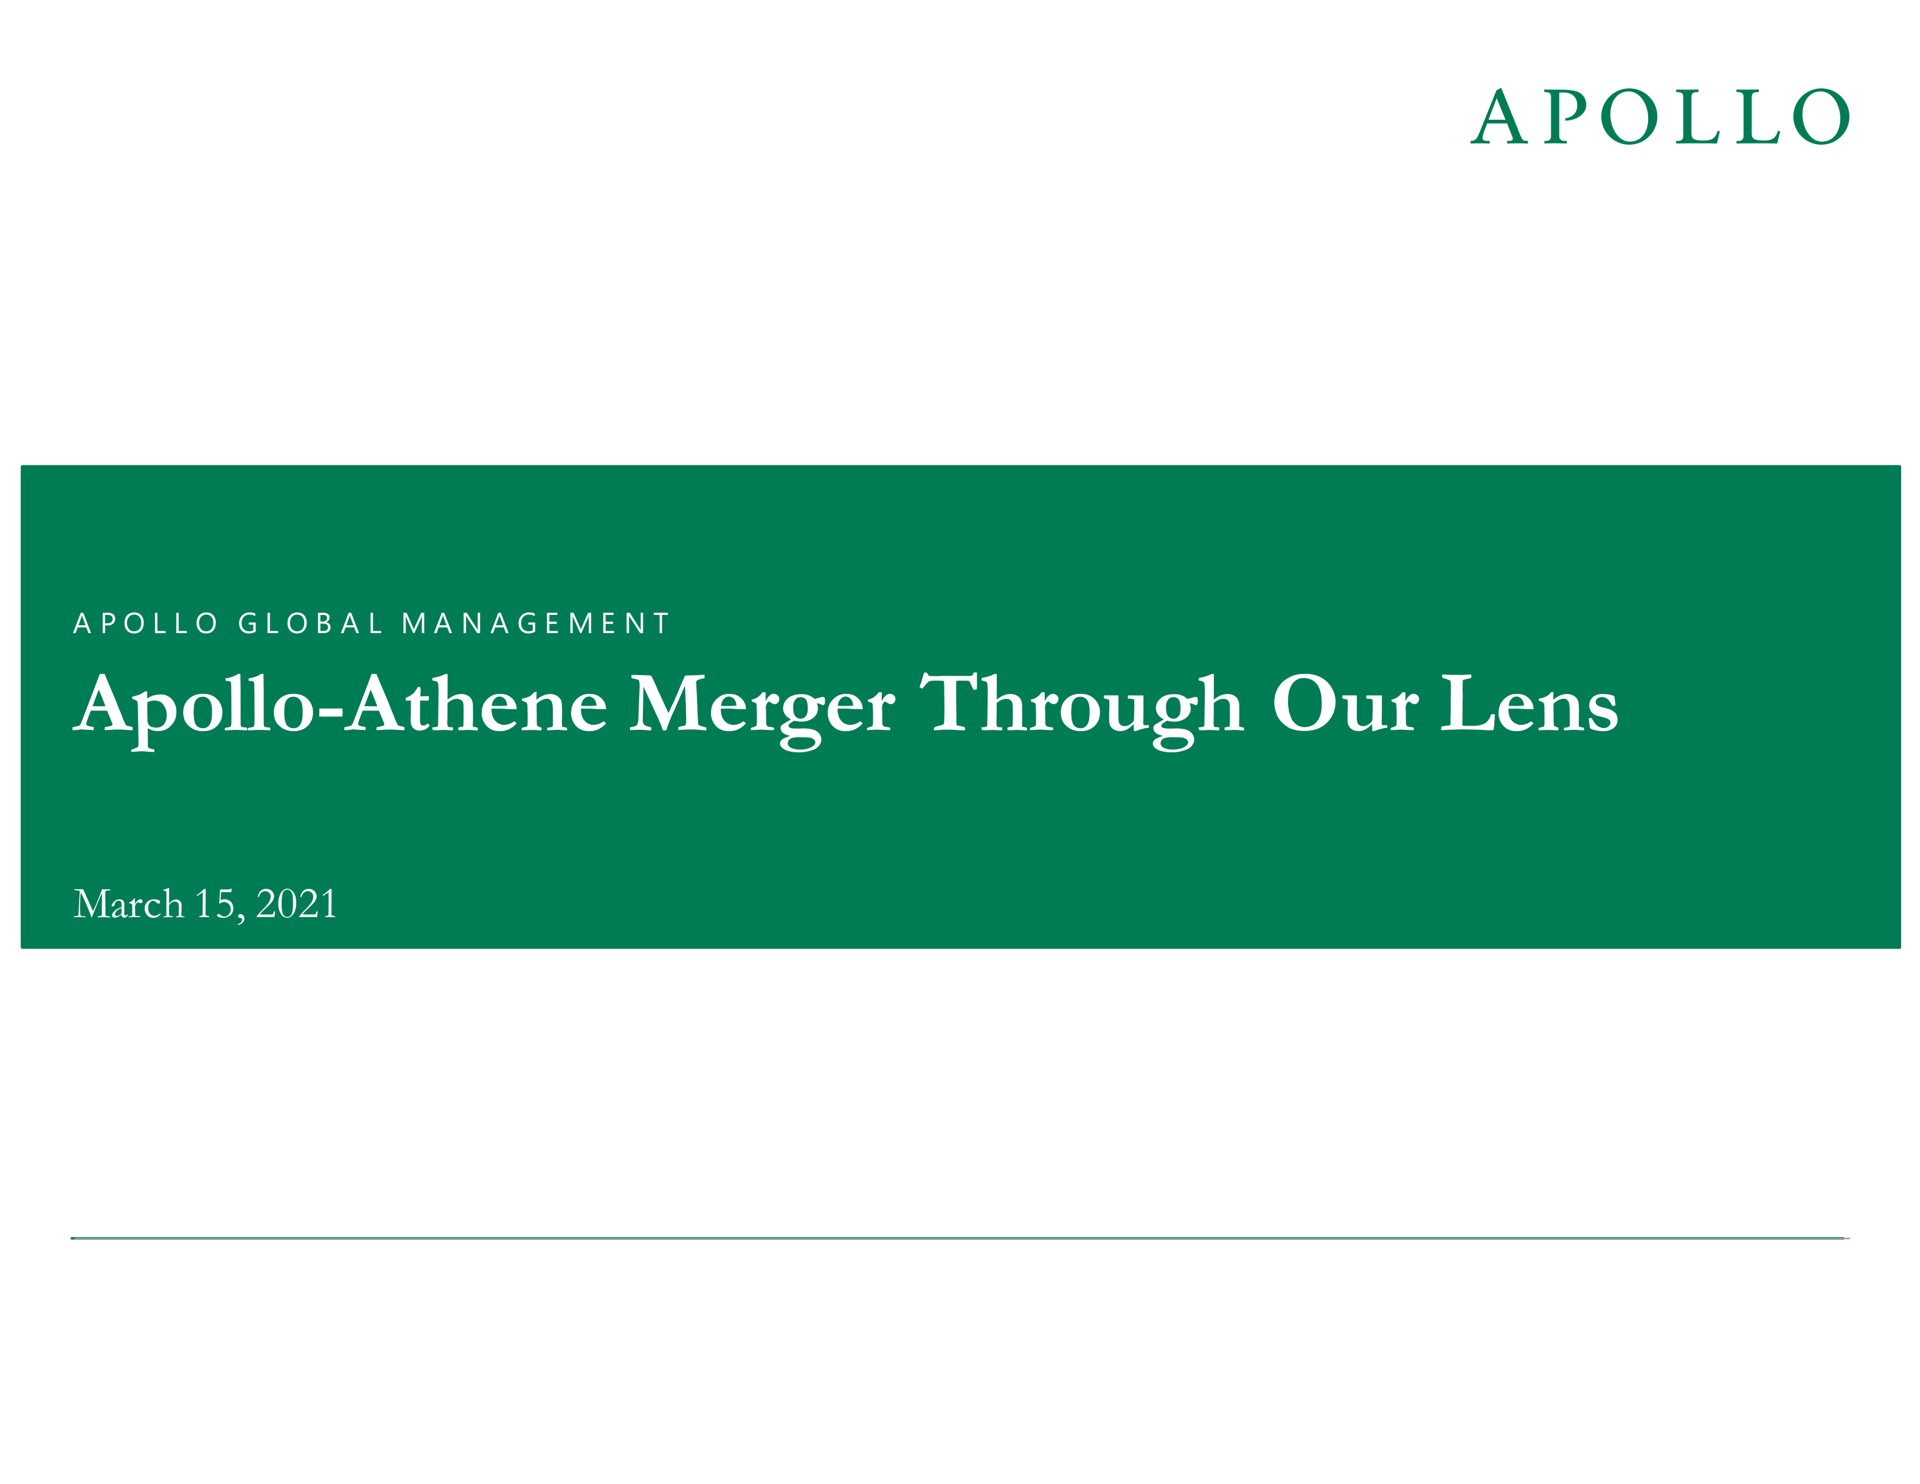 merger through our lens march | Apollo Global Management